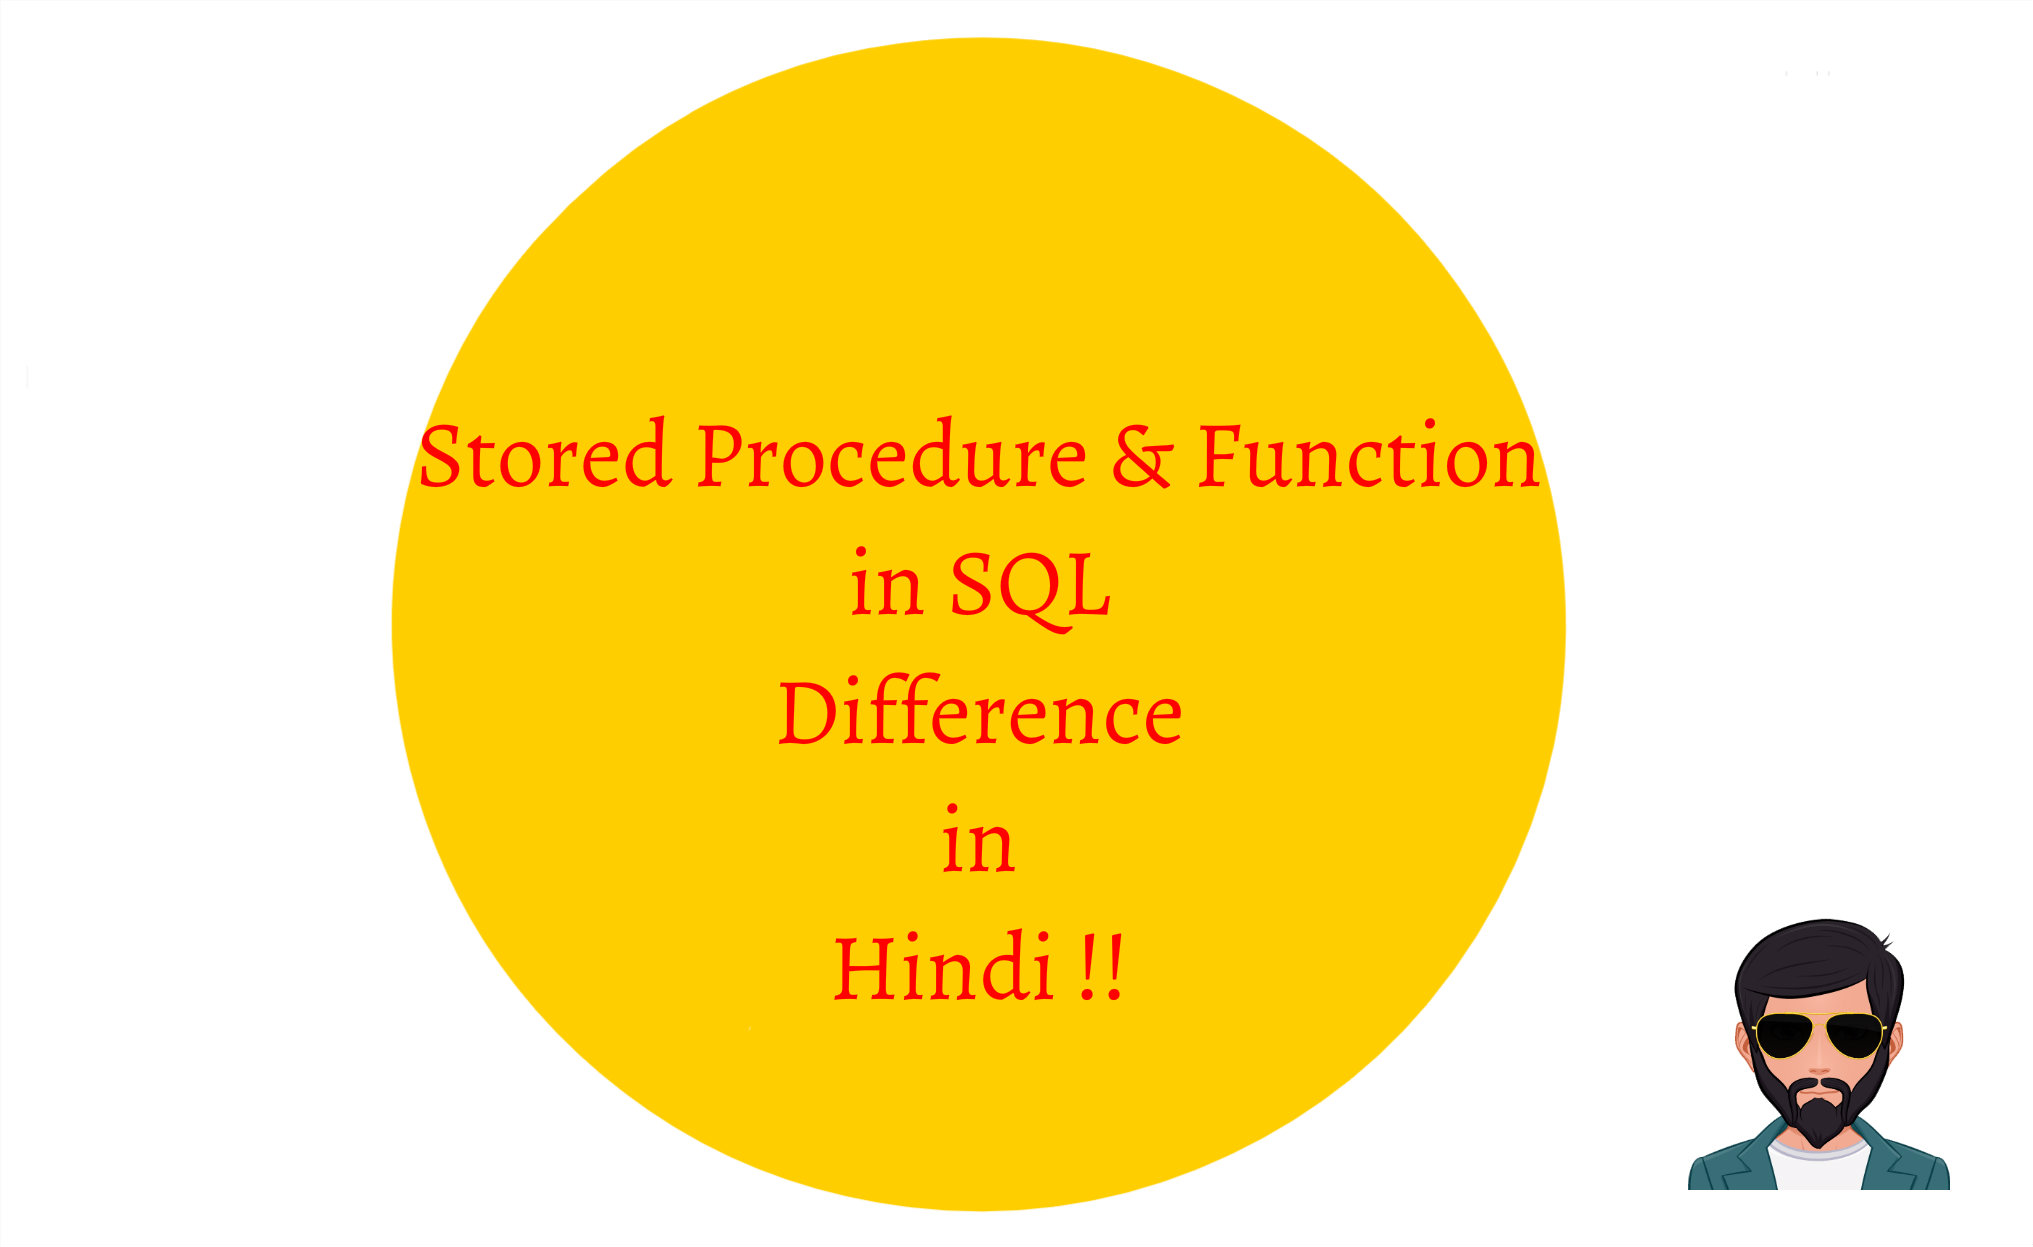 You are currently viewing Stored Procedure & Function in SQL Difference in Hindi !!